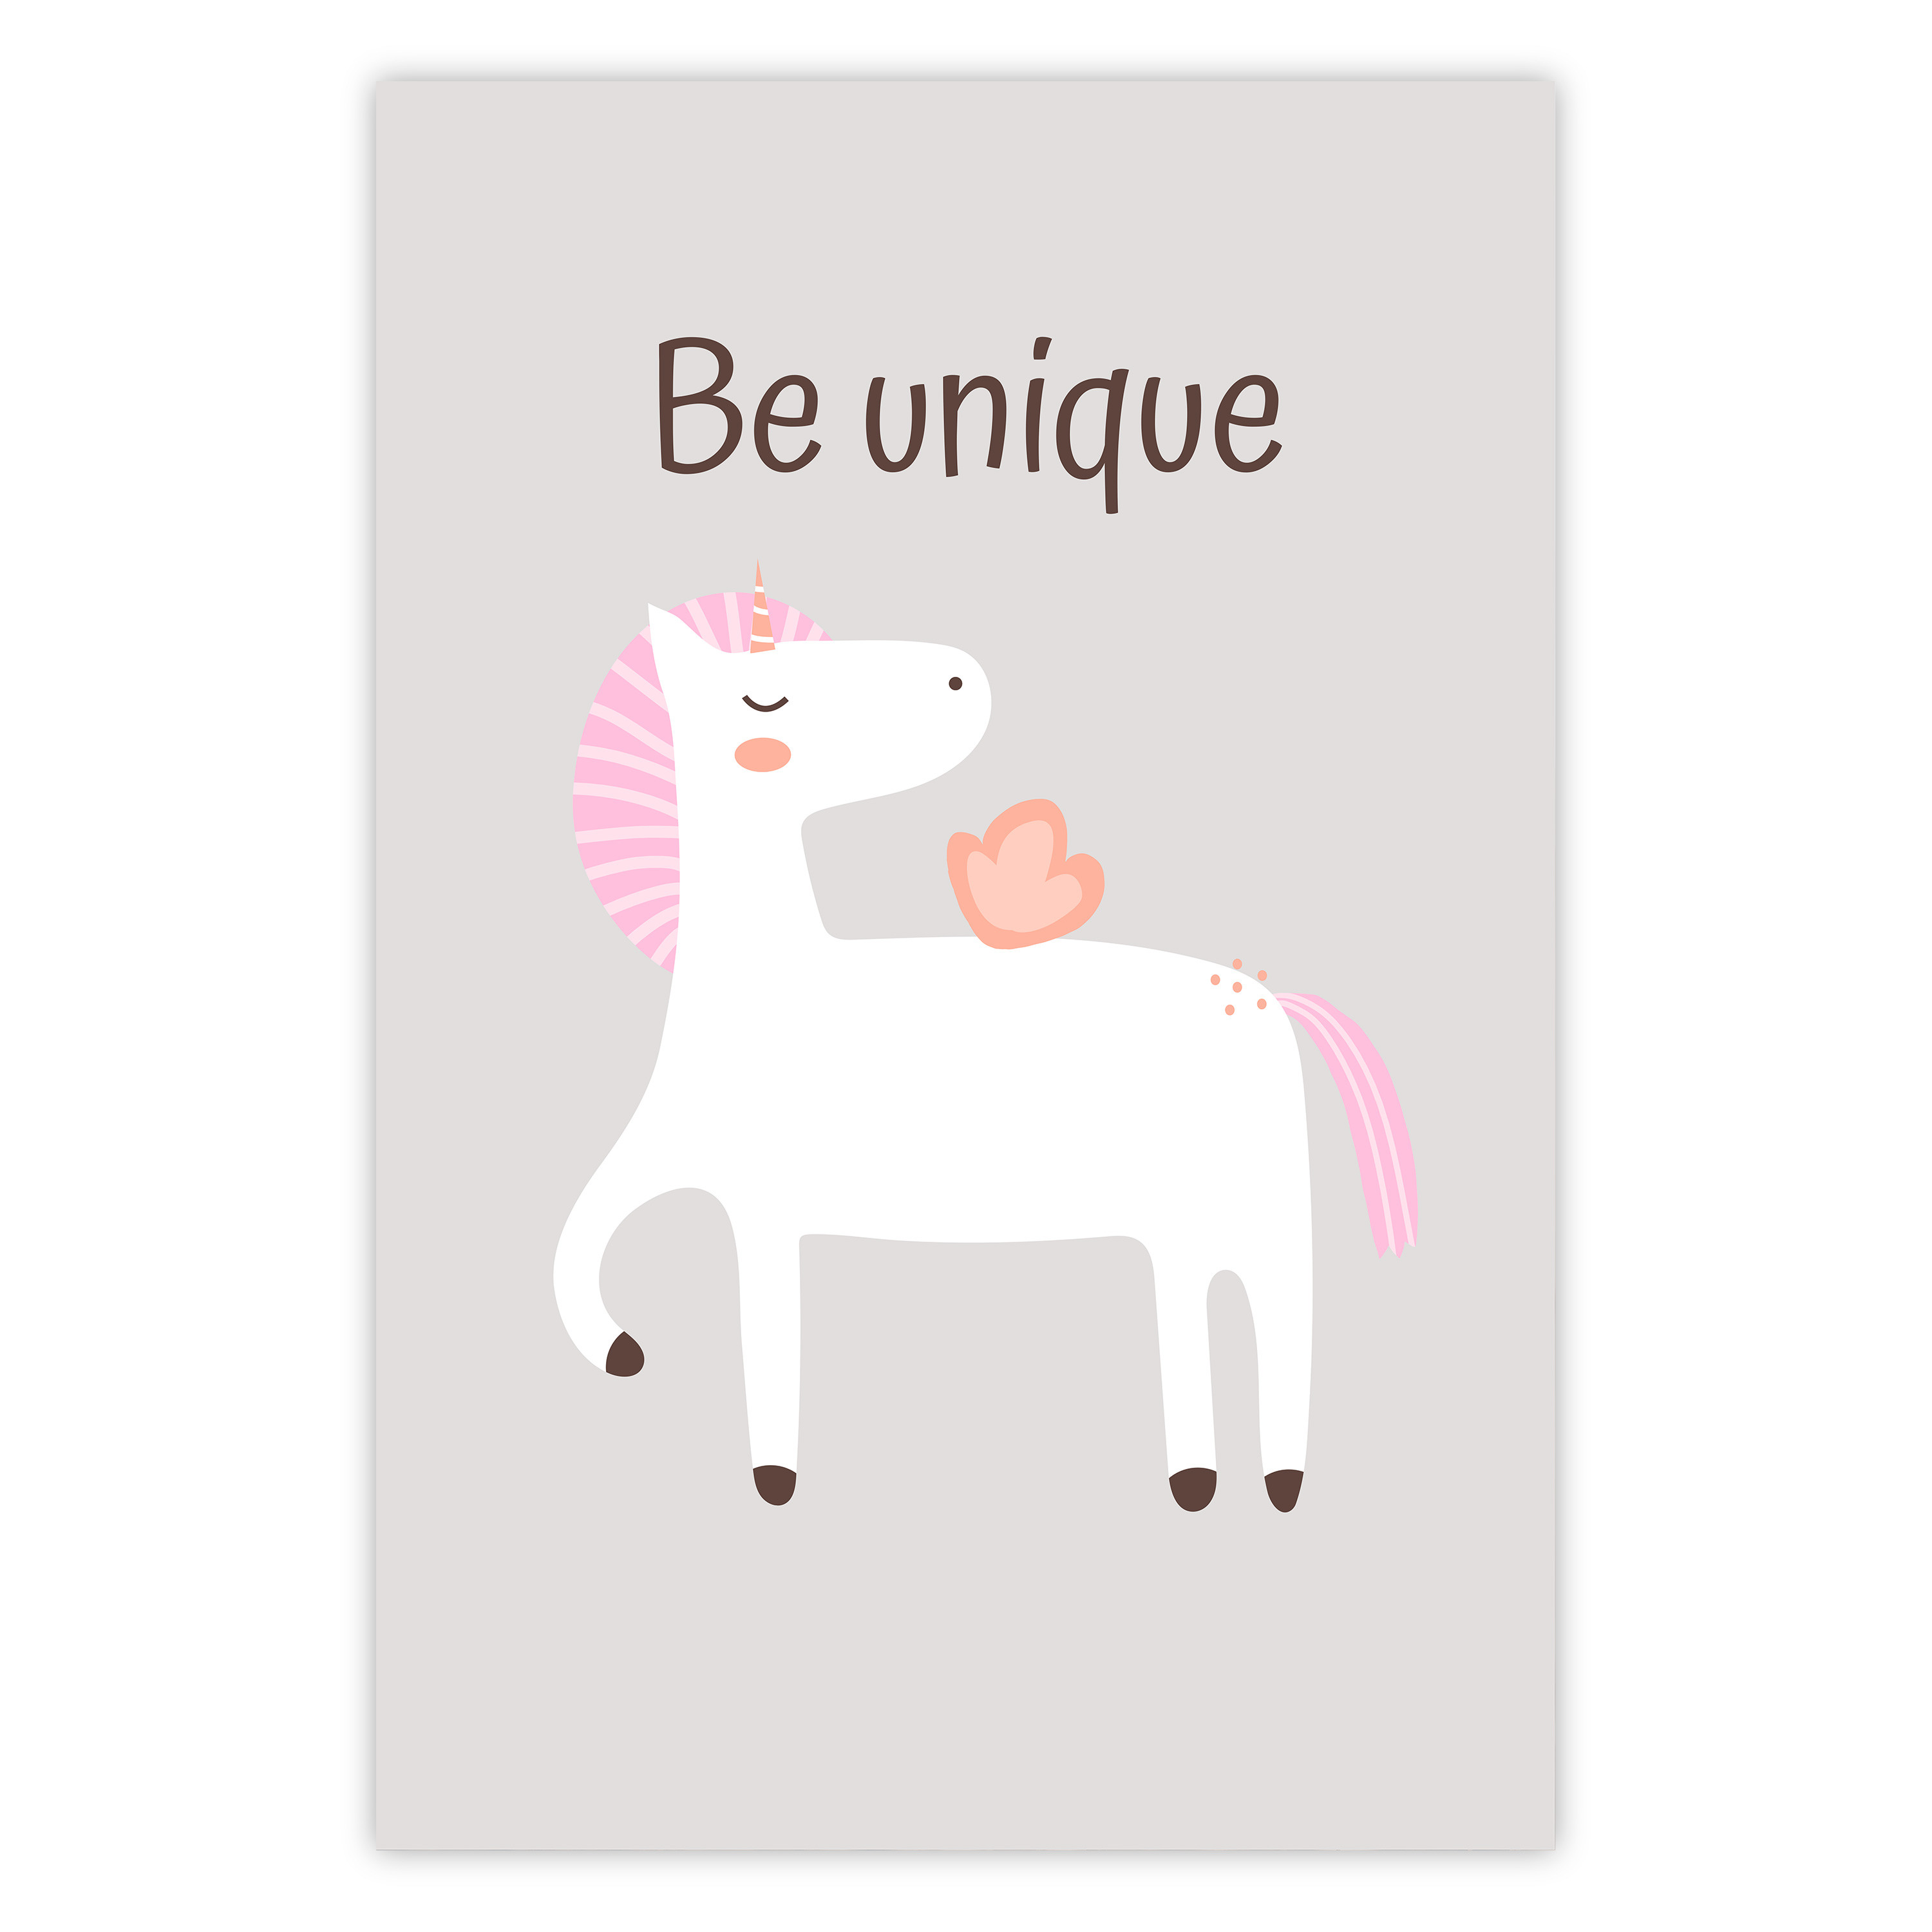 Wandposter Kids Slogan Unicorn and a Motivating - Be Unique for Cheerful - Poster